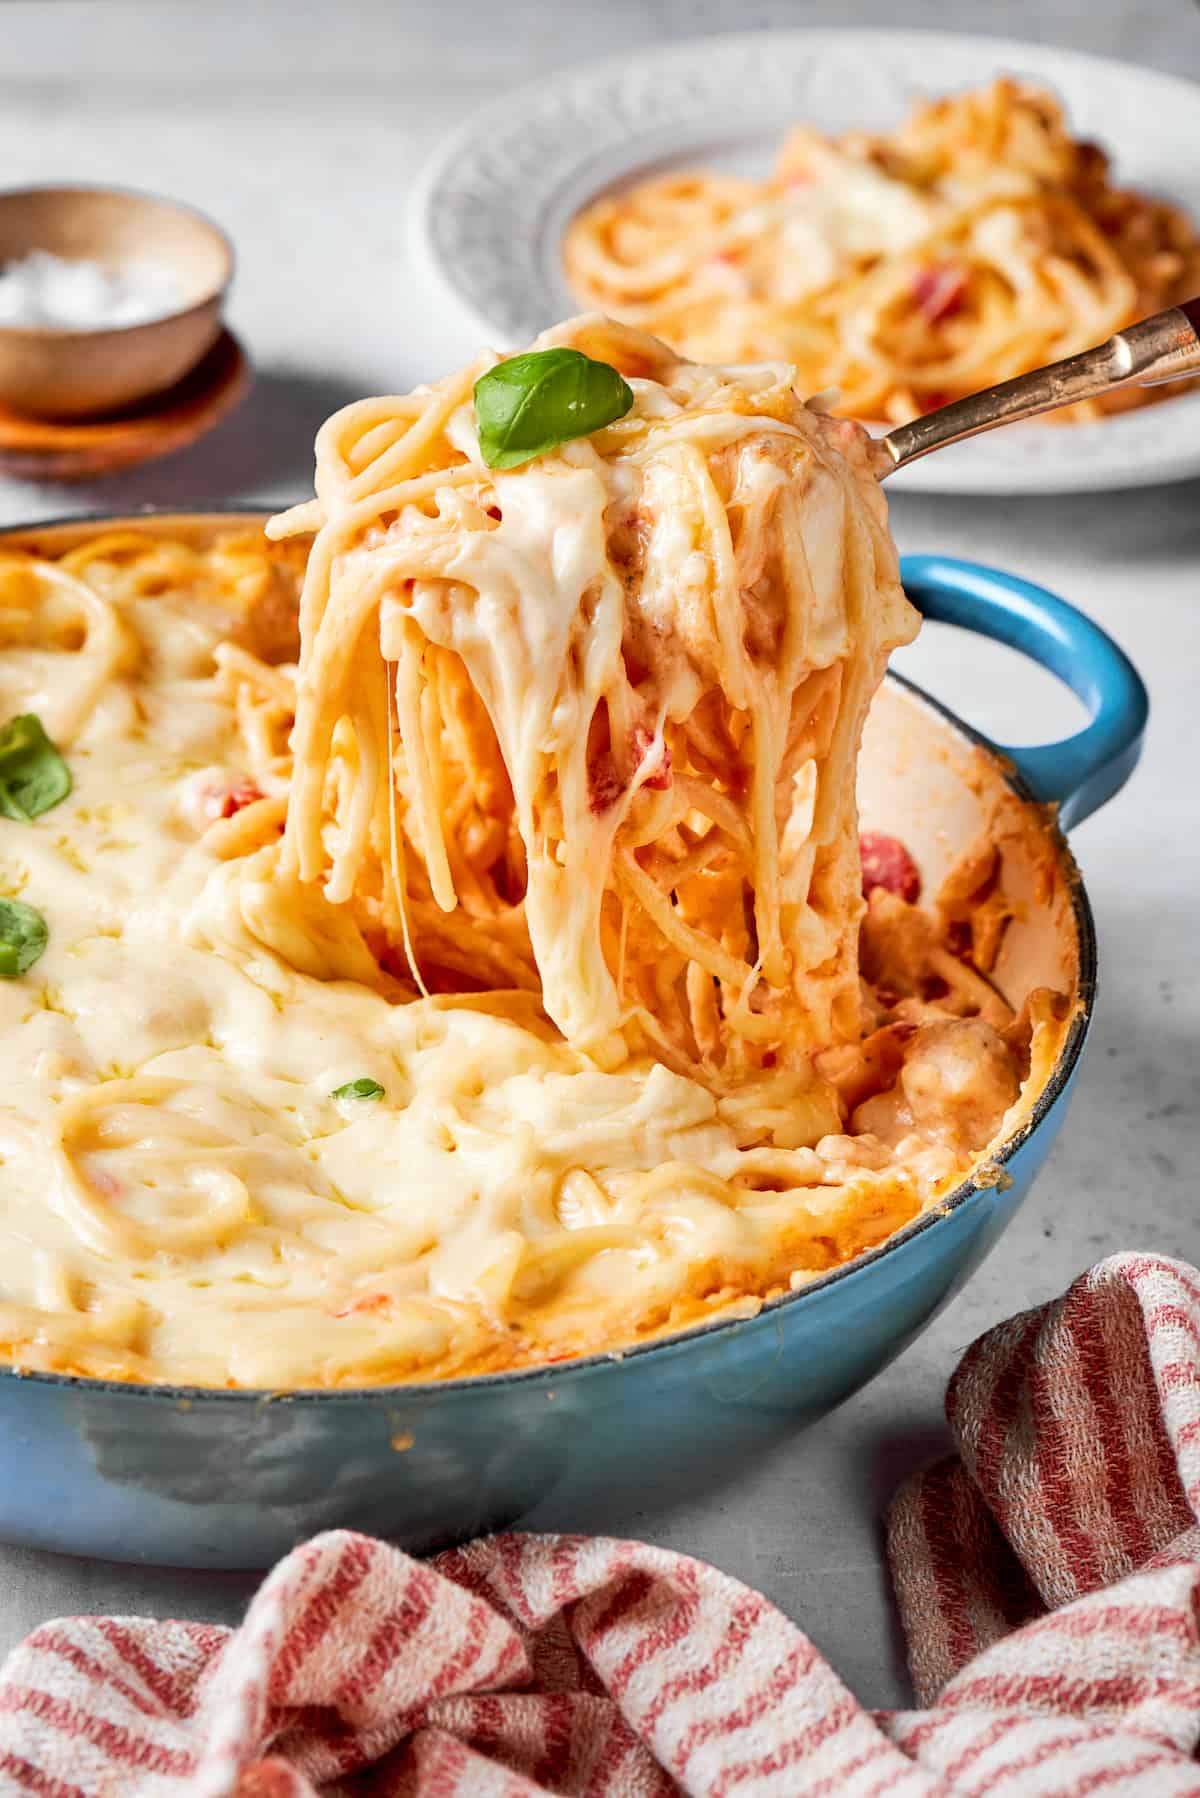 A serving utensil lifts out a potion of cheesy chicken spaghetti.